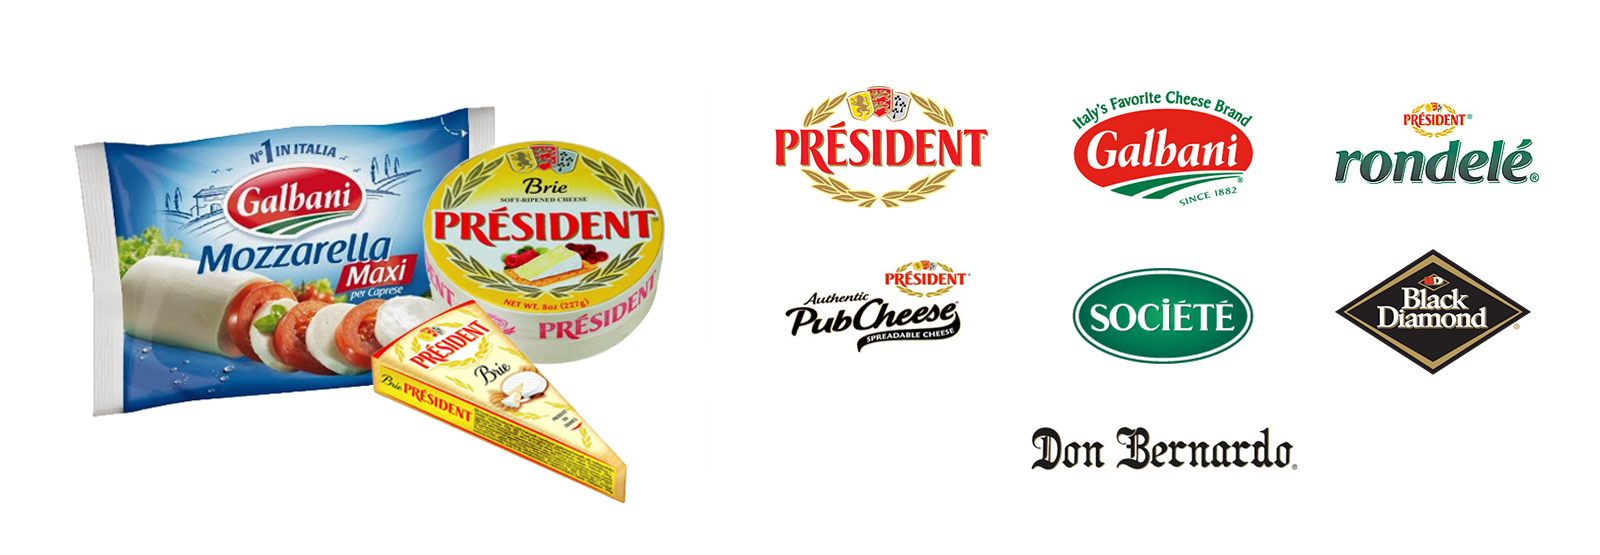 Solve Wins Président, Galbani, Globally Respected Specialty Cheese Brands